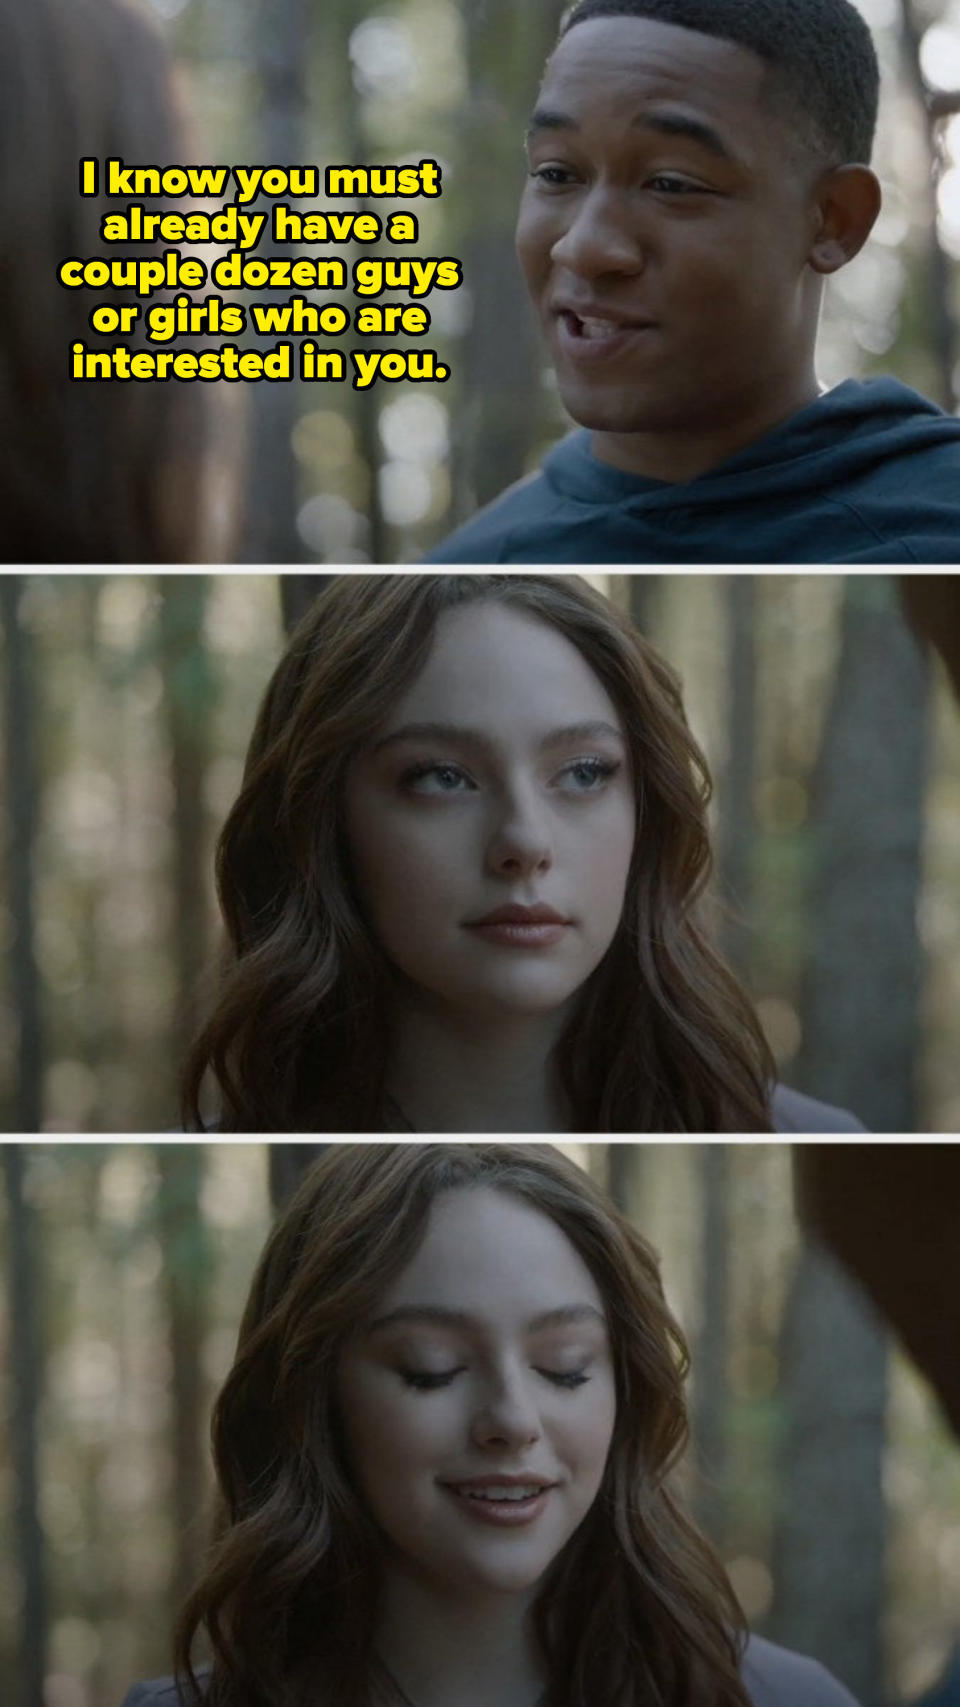 Hope from "Legacies" with caption, "I know you must already have a couple dozen guys or girls that are interested in you"